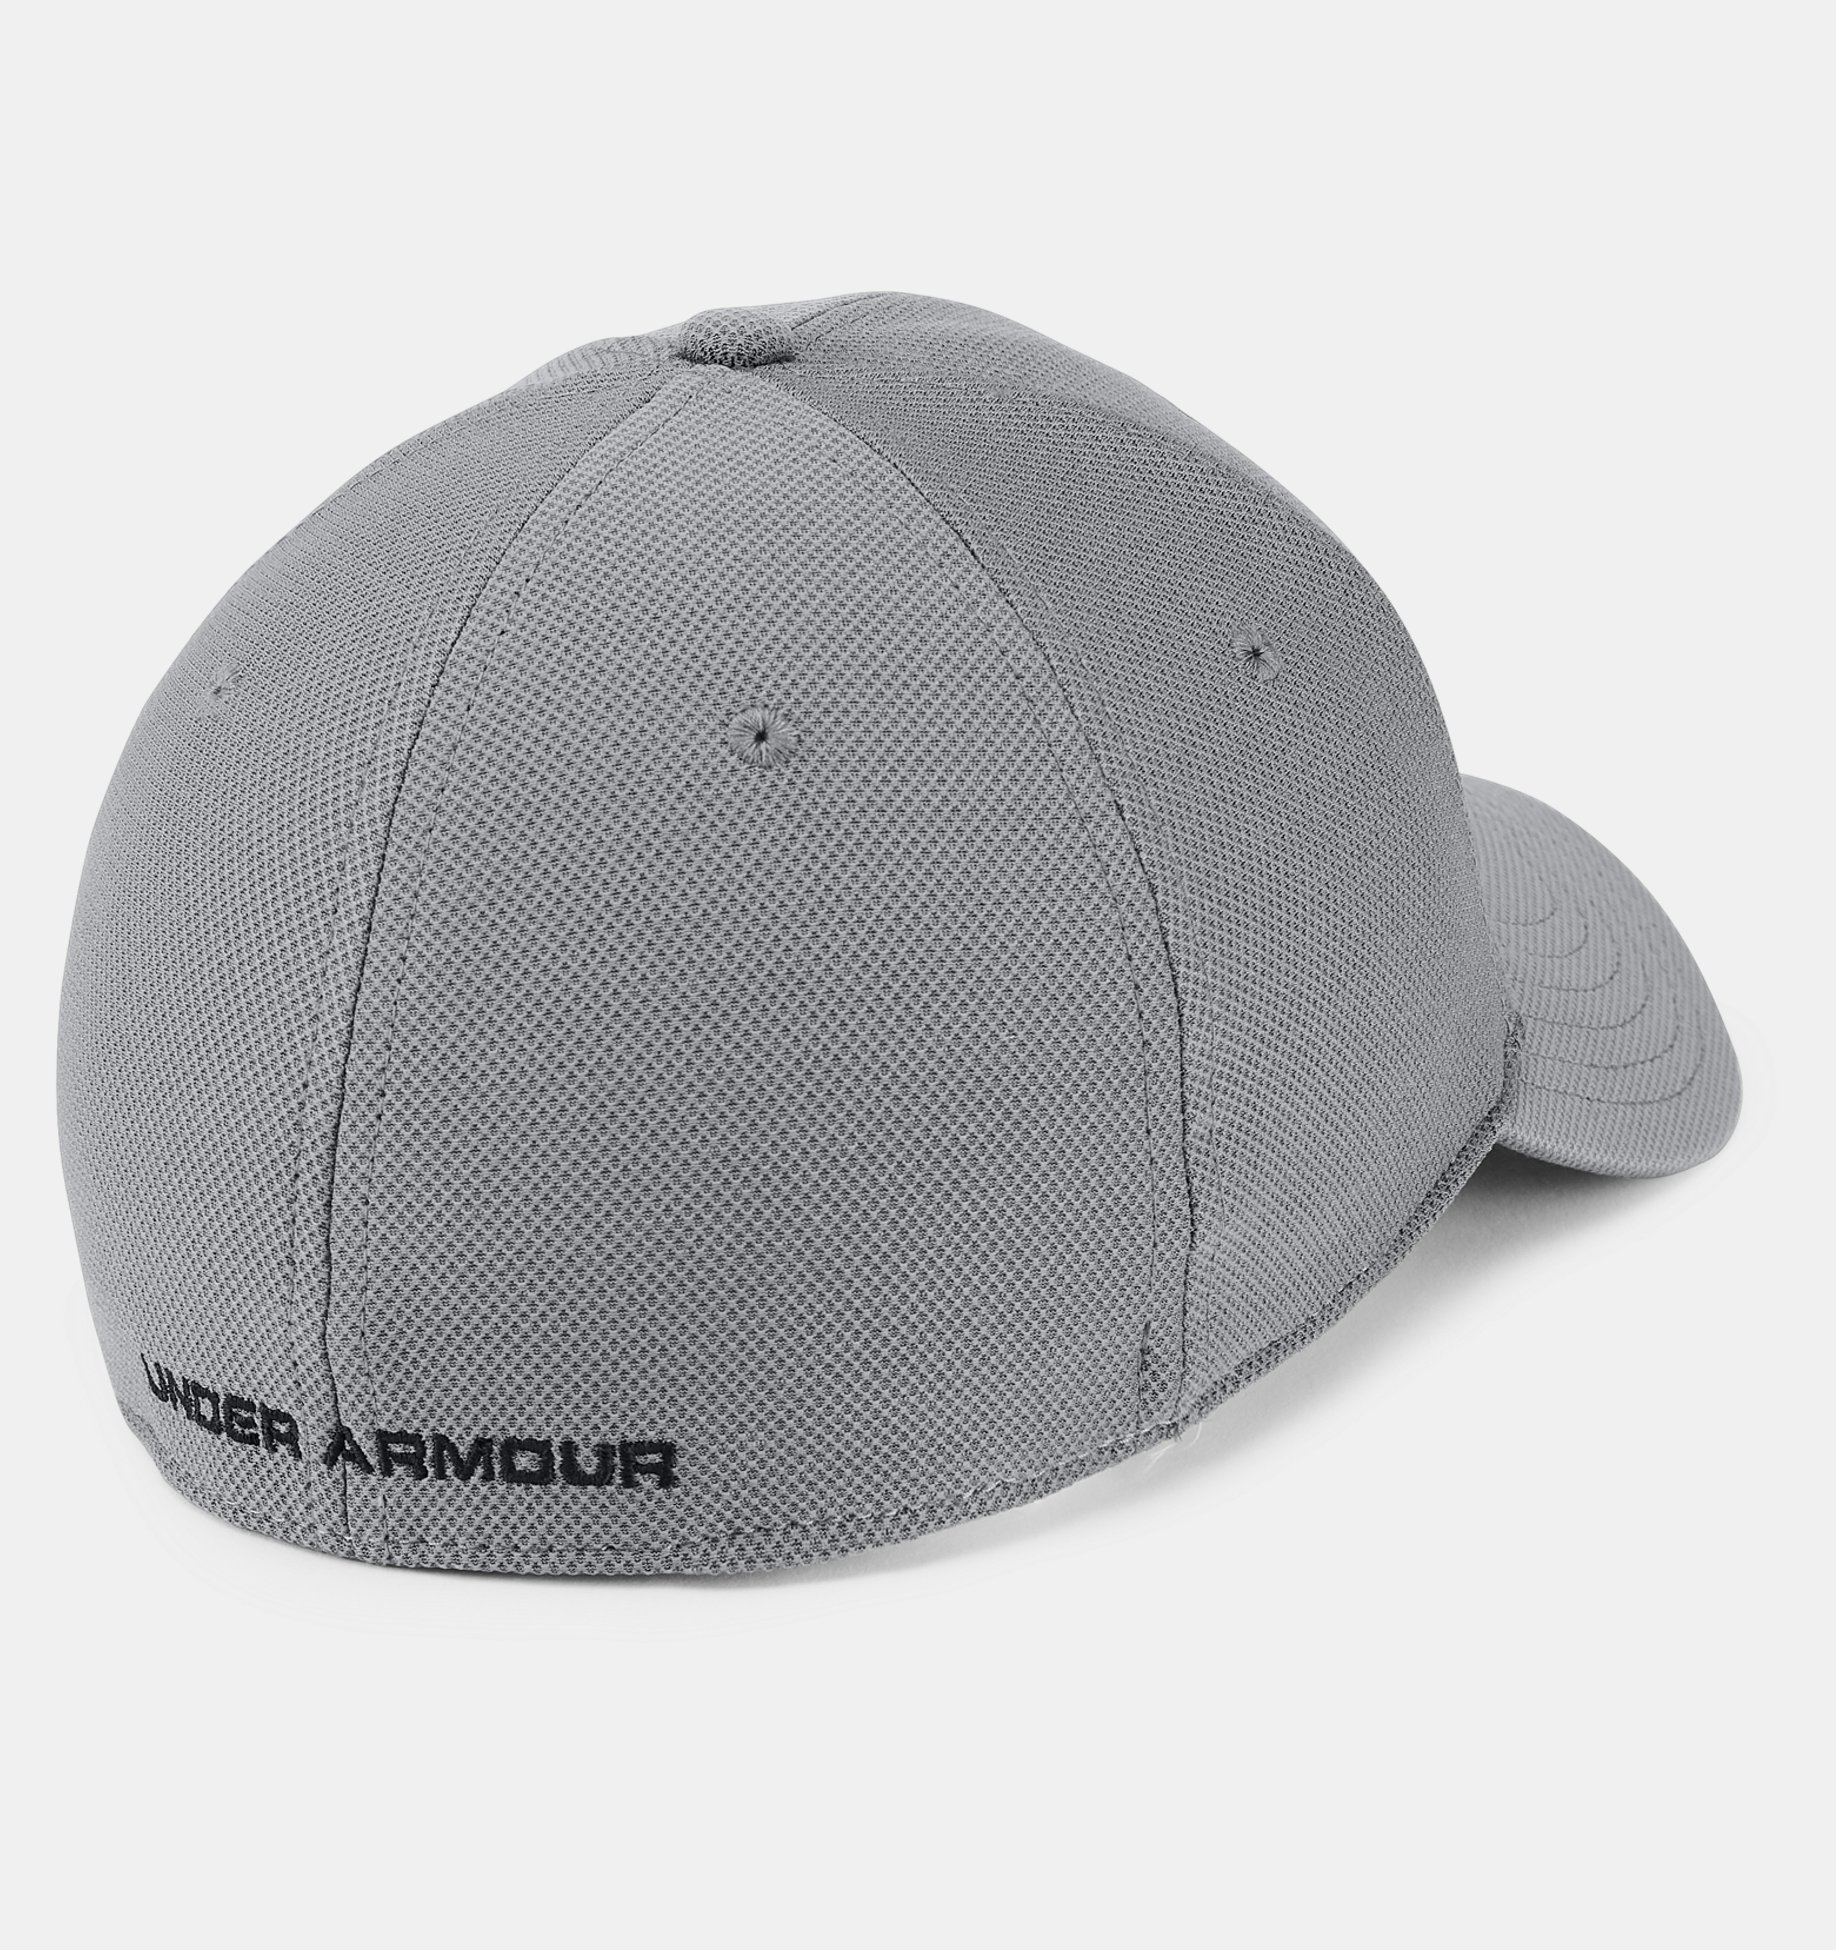 Breathable Cap for Men Comfortable Snapback for Men with Built-In Sweatband Under Armour Men‘s Baseball Cap UA Blitzing 3.0 